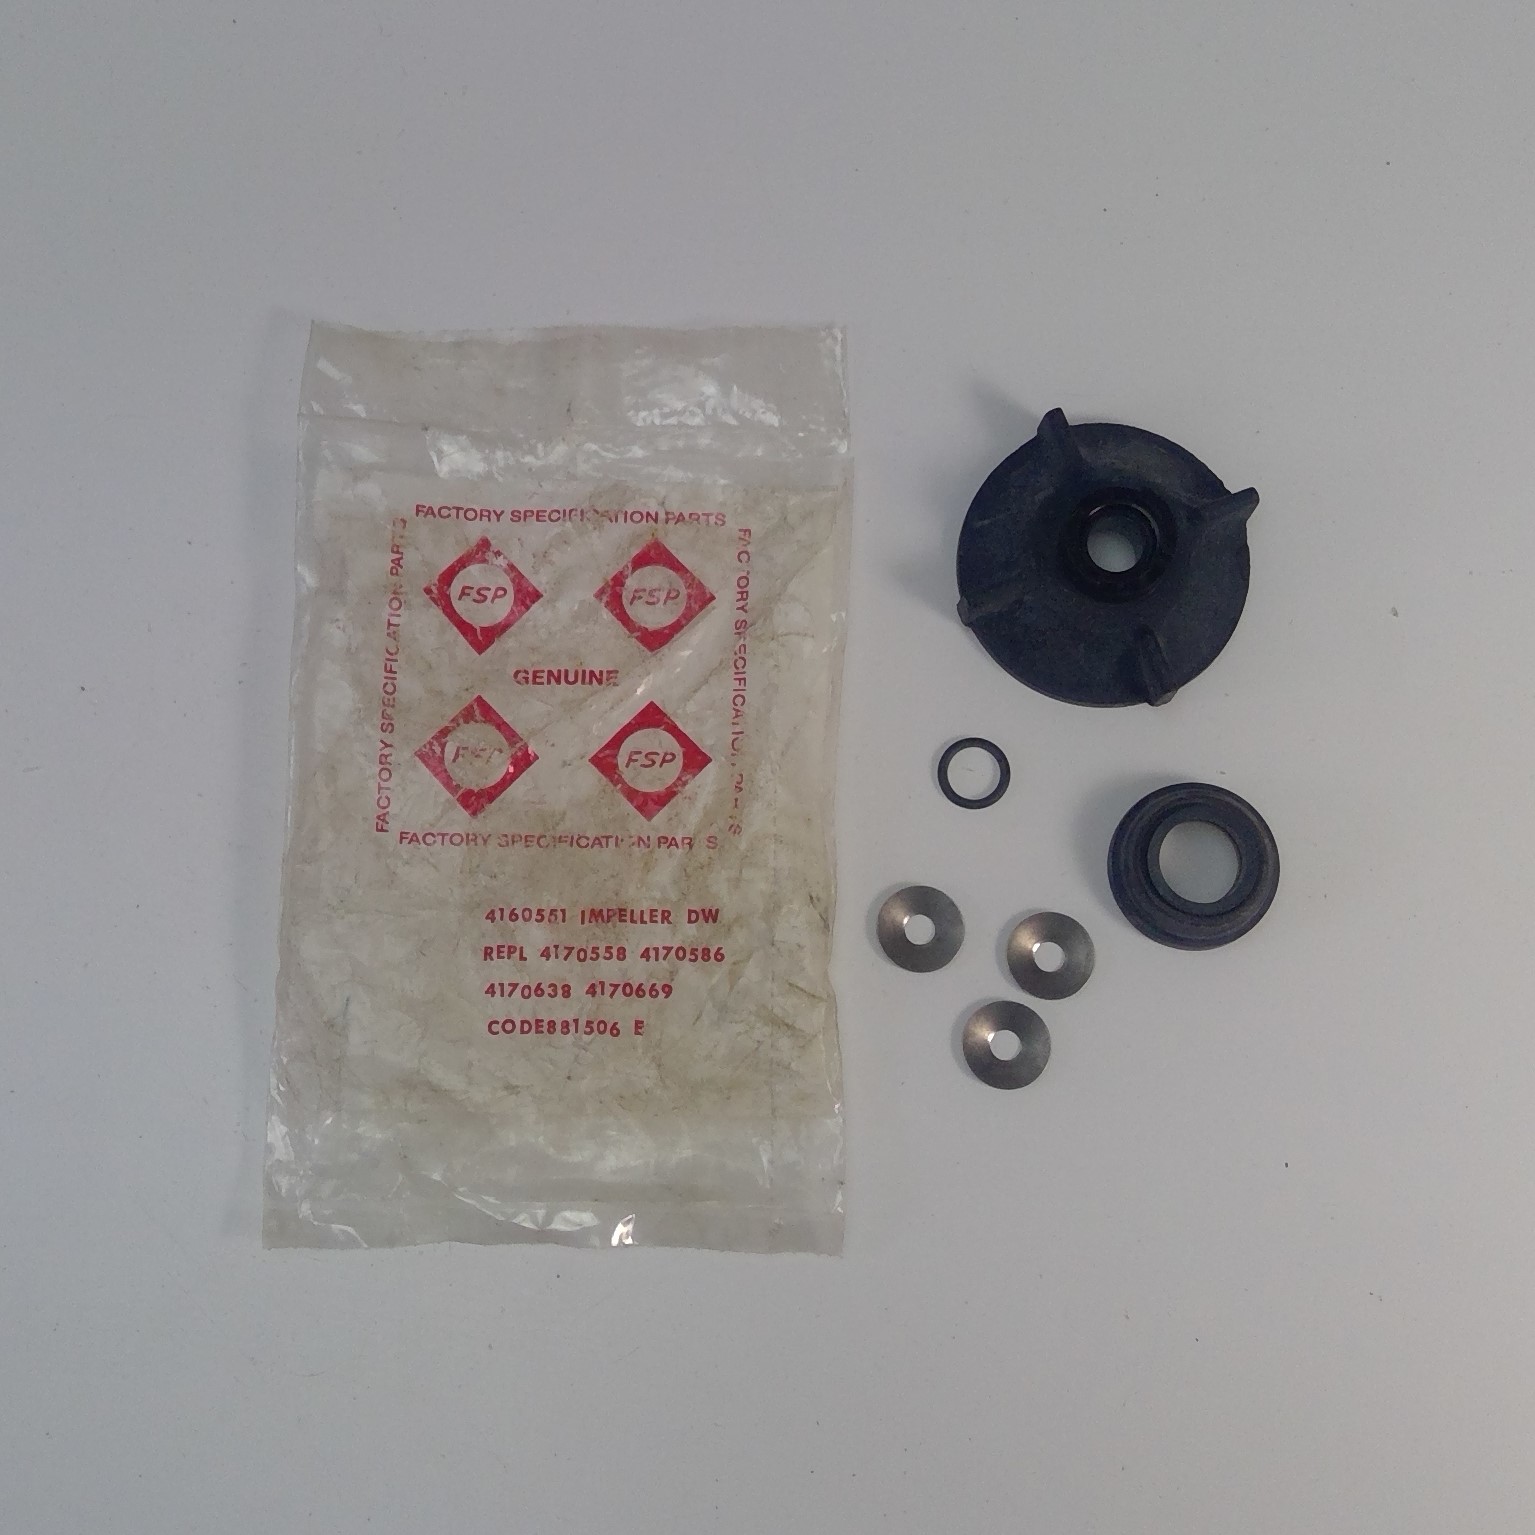 Whirlpool Dishwasher Drain Impeller And Seal Kit. Part #4160551